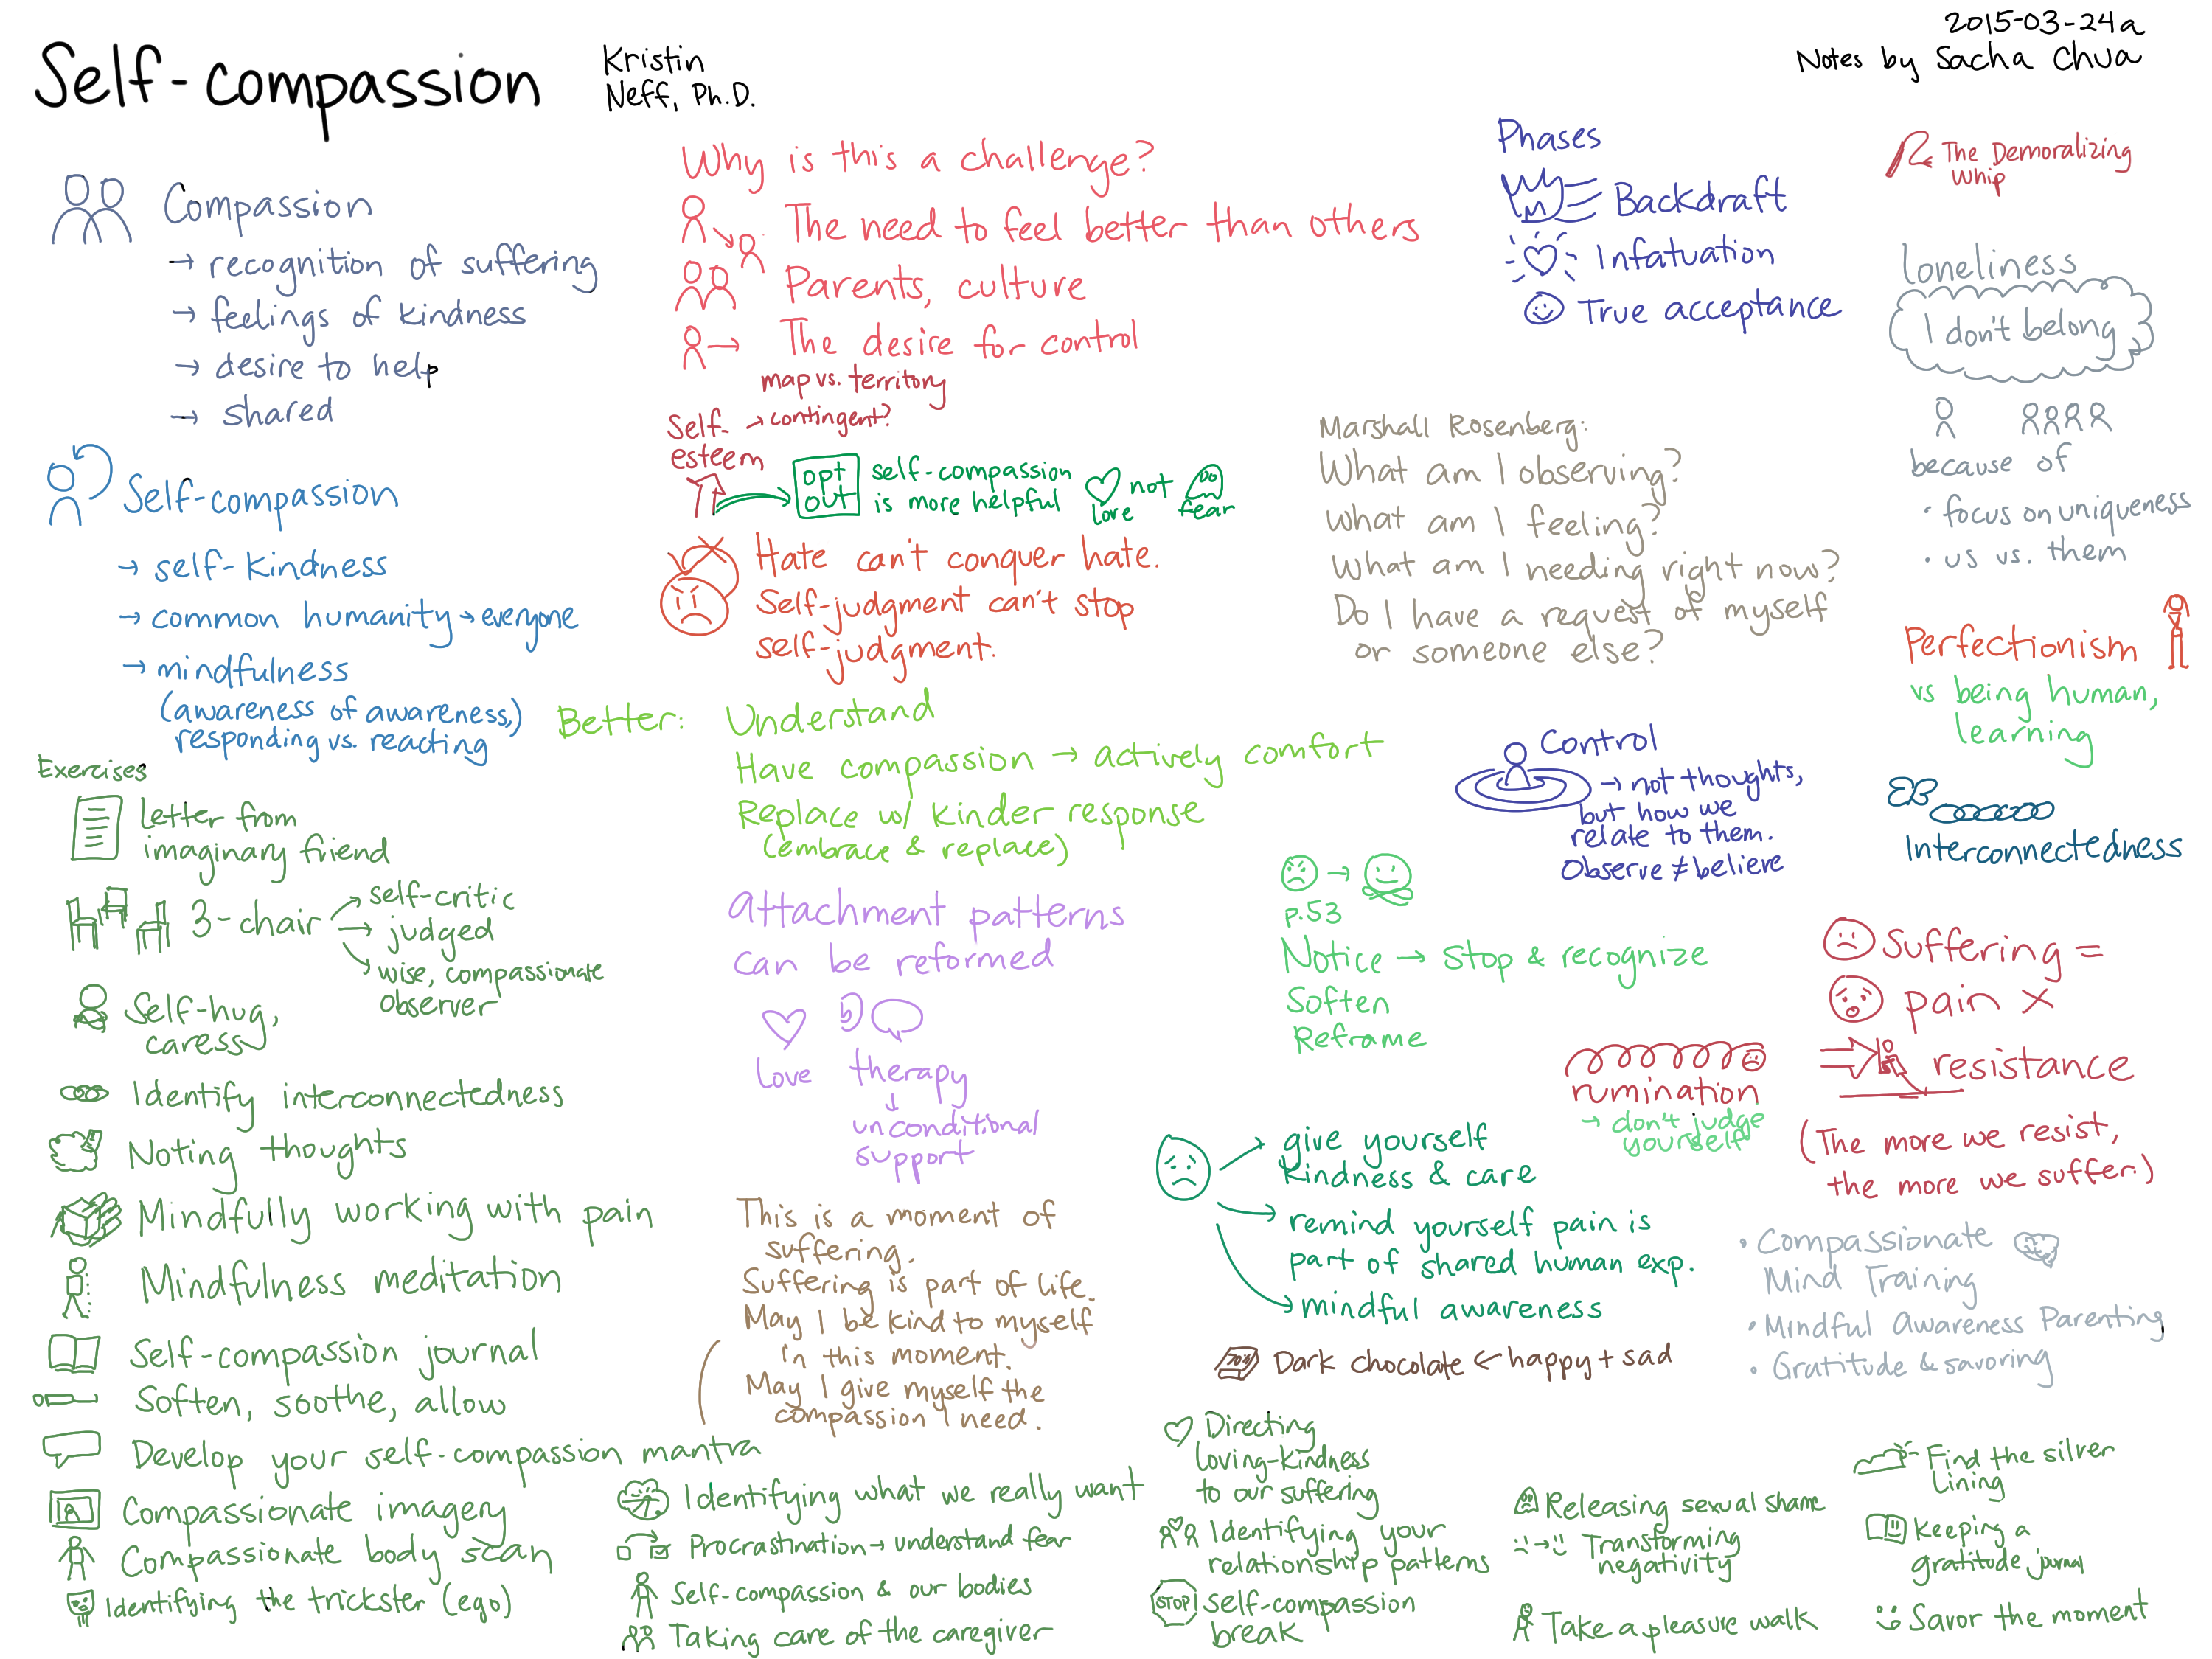 2015-03-24a Sketched Book - Self-compassion - Kristin Neff.png